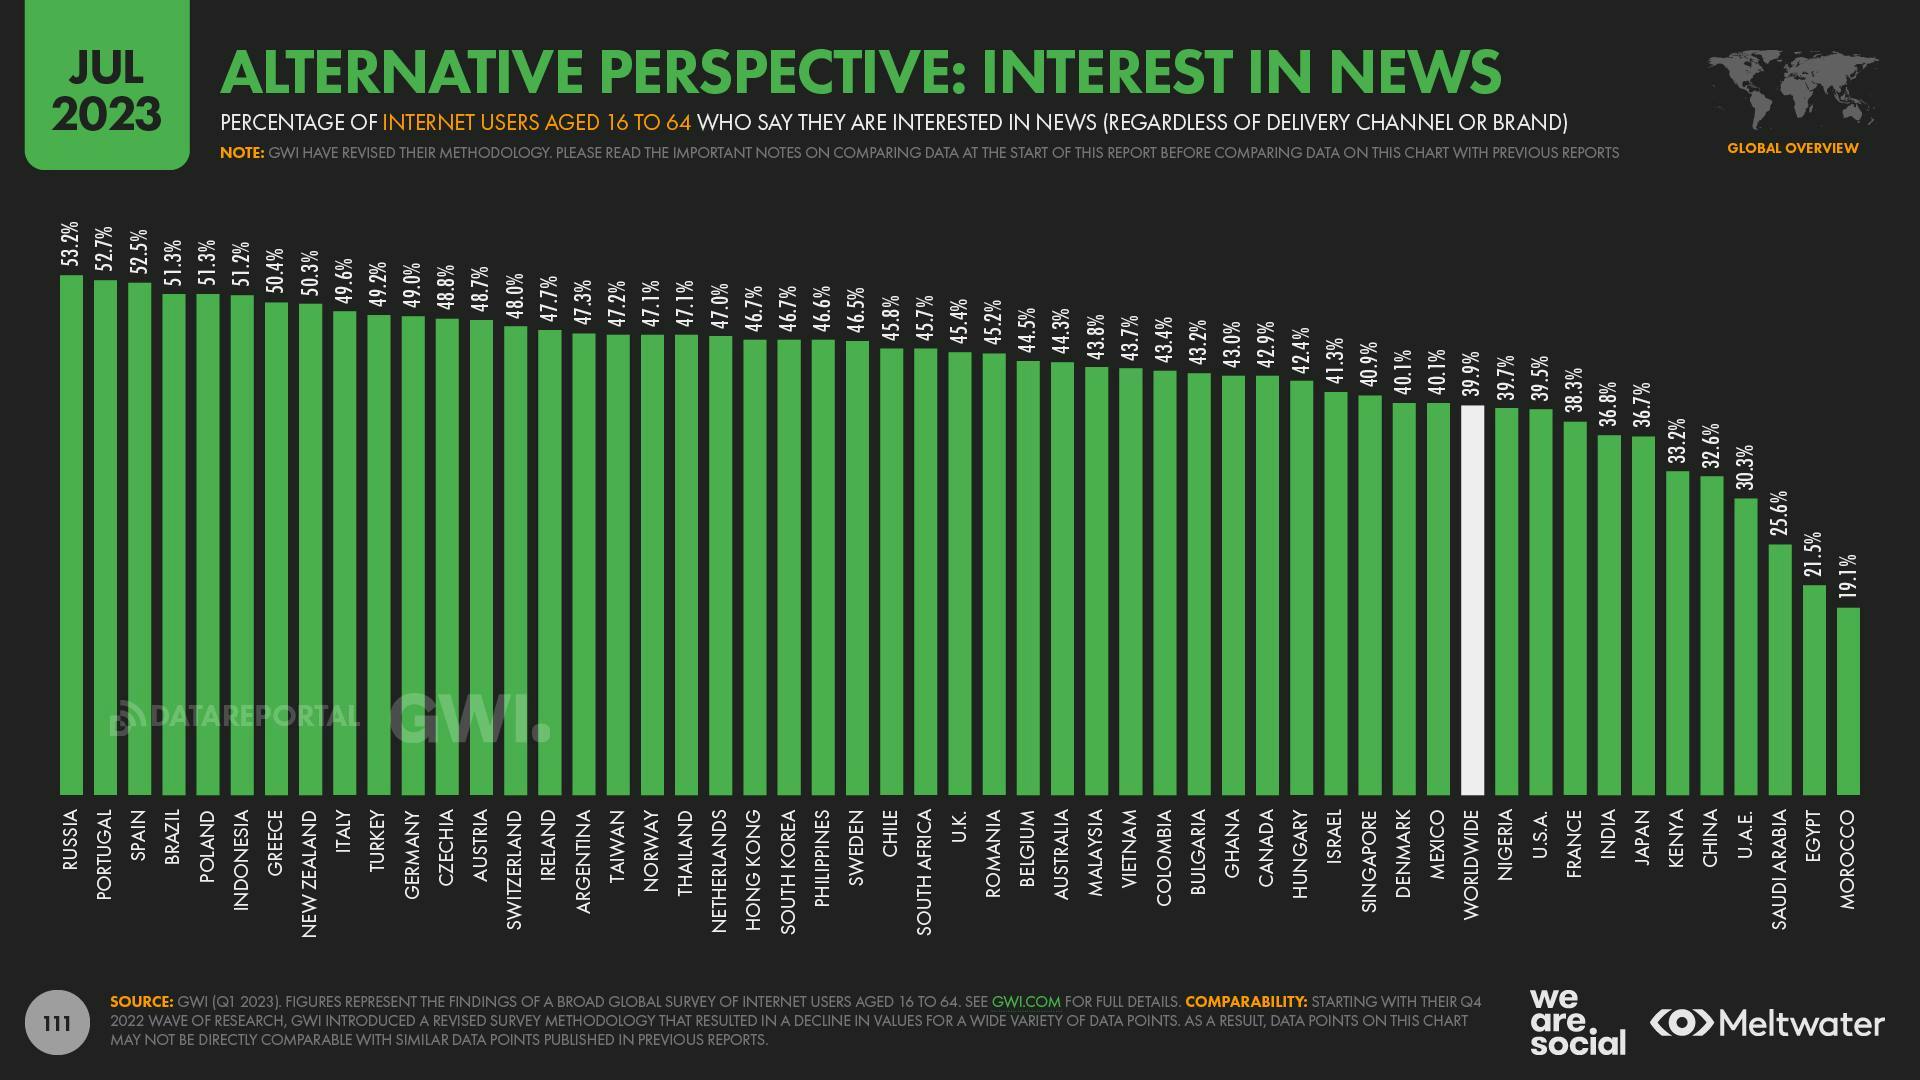 A bar chart showing the percentage of internet users who are interested in news across different countries according to GWI survey data, with a global average of 39.9% indicating interest.